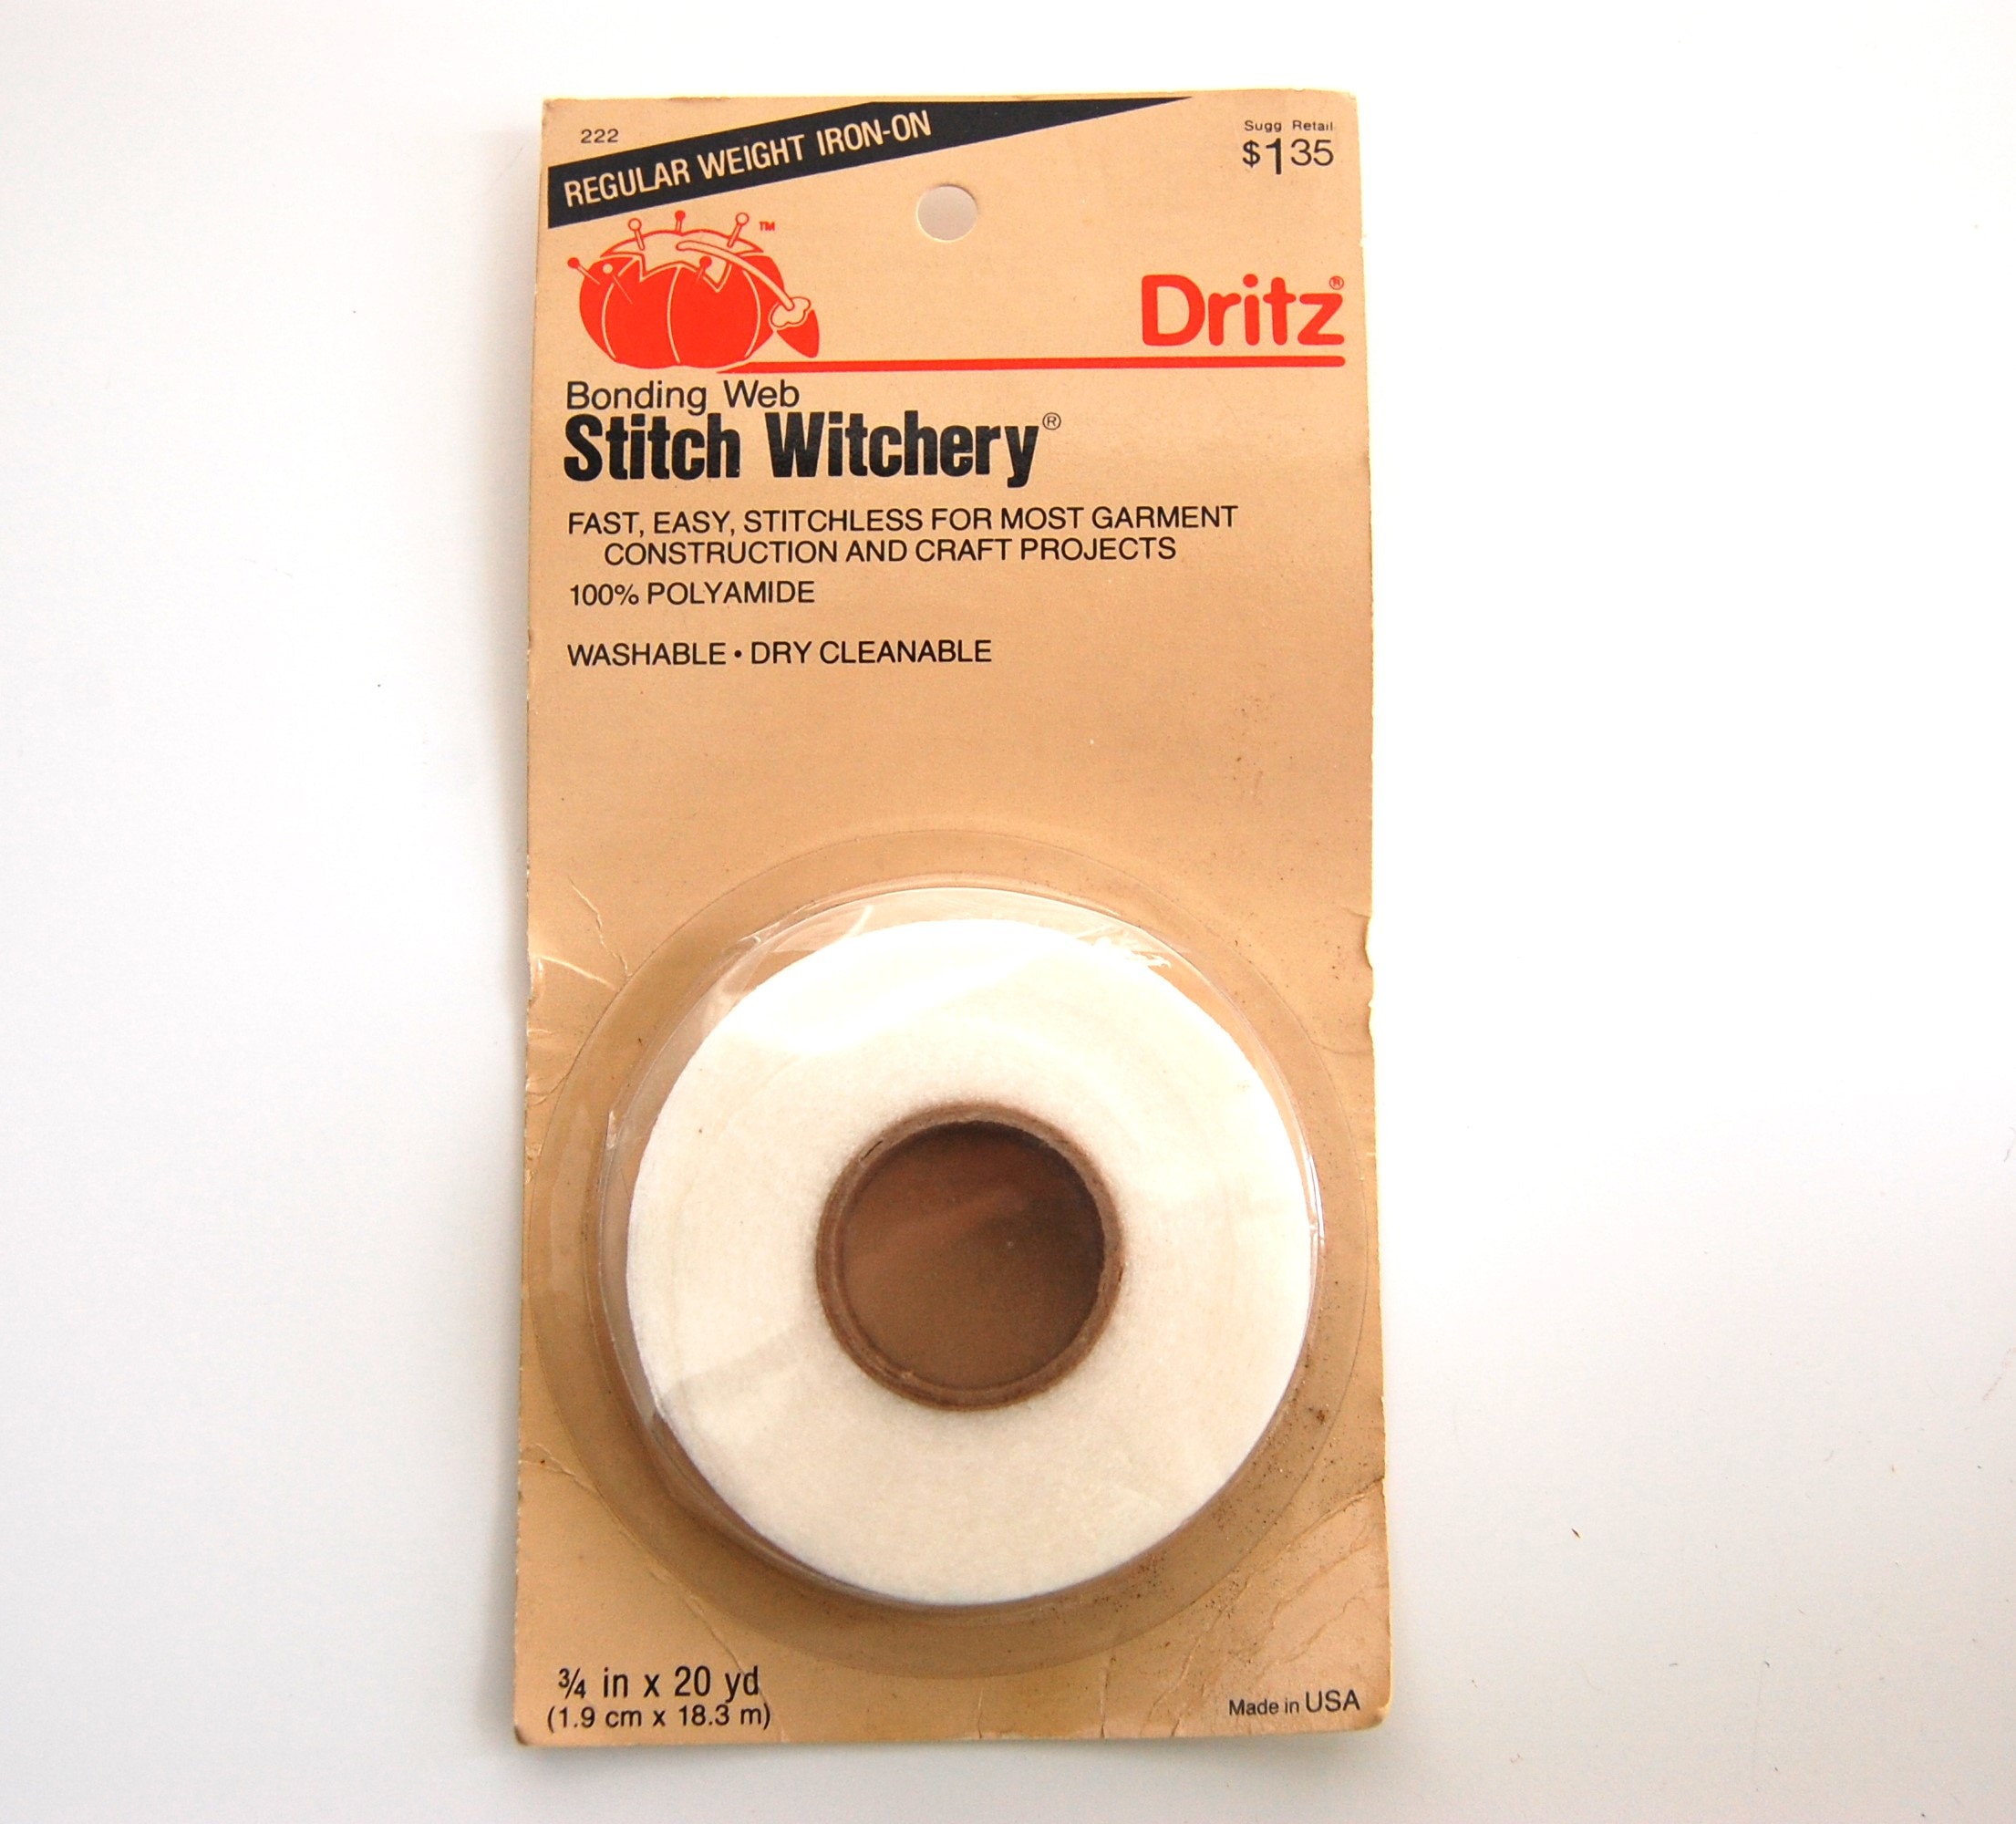 Vintage 1980s Dritz Stitch Witchery Sewing Notion Tool, Vintage Collectible  Sewing Notions, Craft Sew Stitchless Webbing Original Packaging 